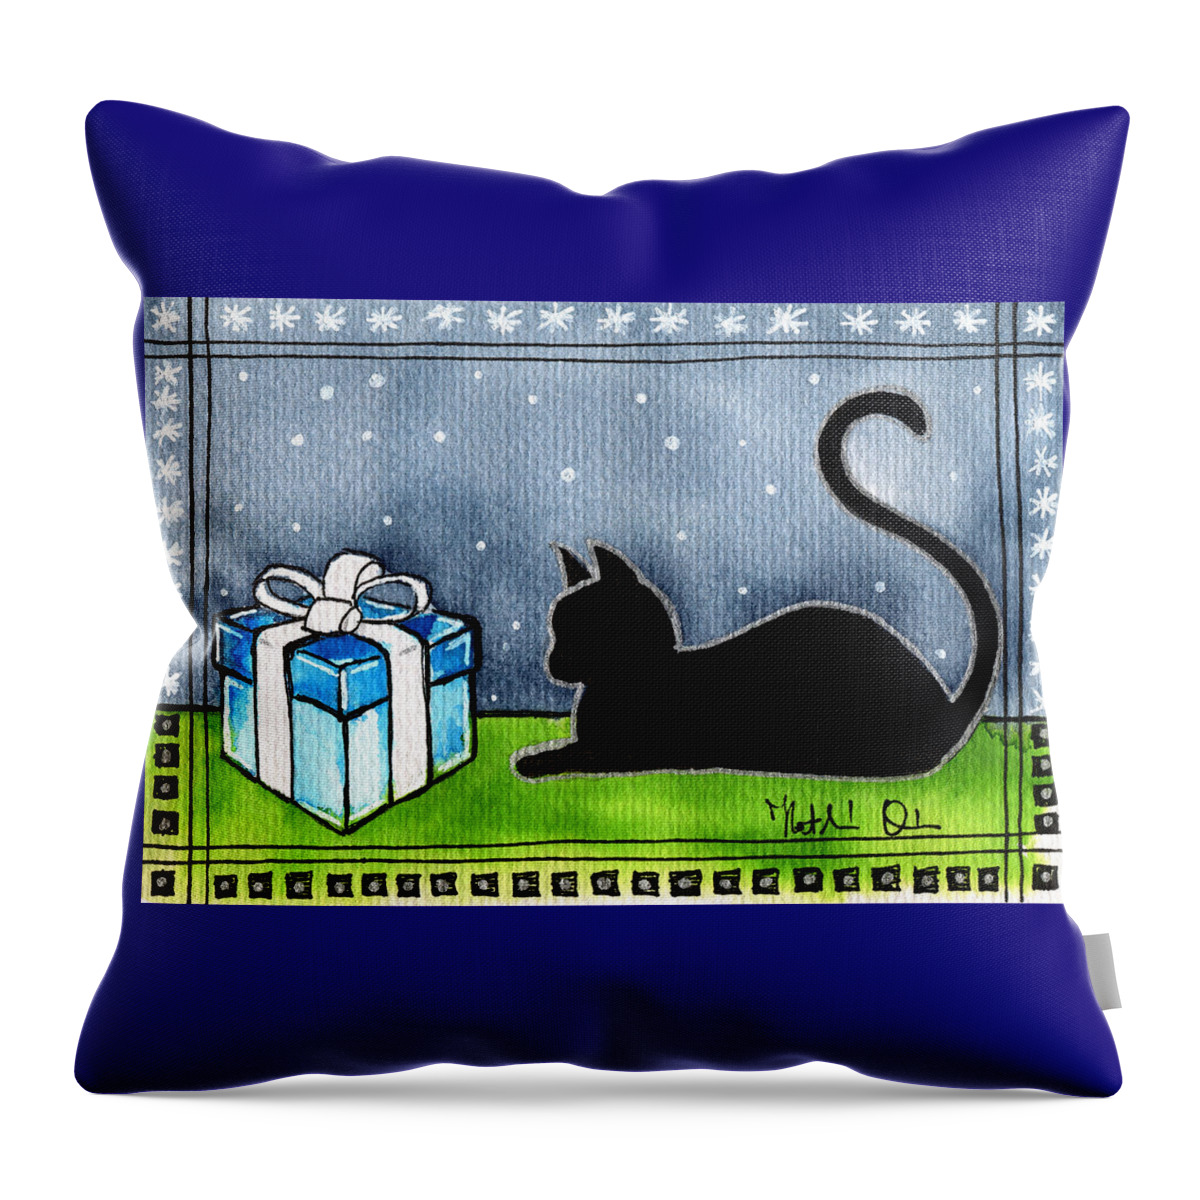 The Box Is Mine Throw Pillow featuring the painting The Box Is Mine - Christmas Cat by Dora Hathazi Mendes